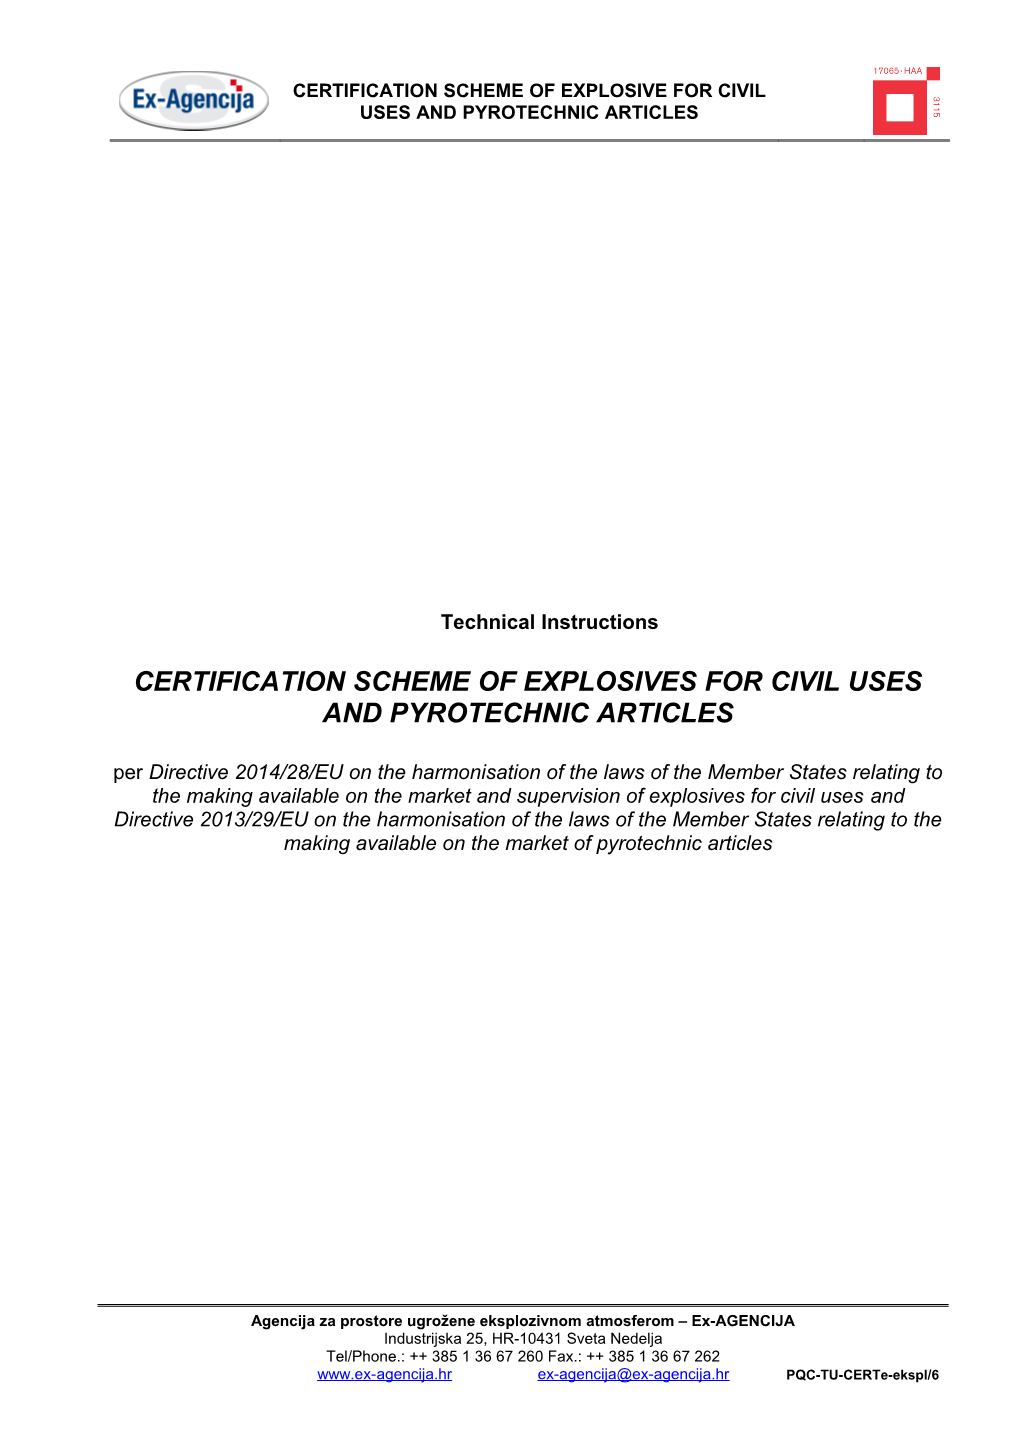 Certification Schemeof Explosives for Civil Uses and Pyrotechnic Articles